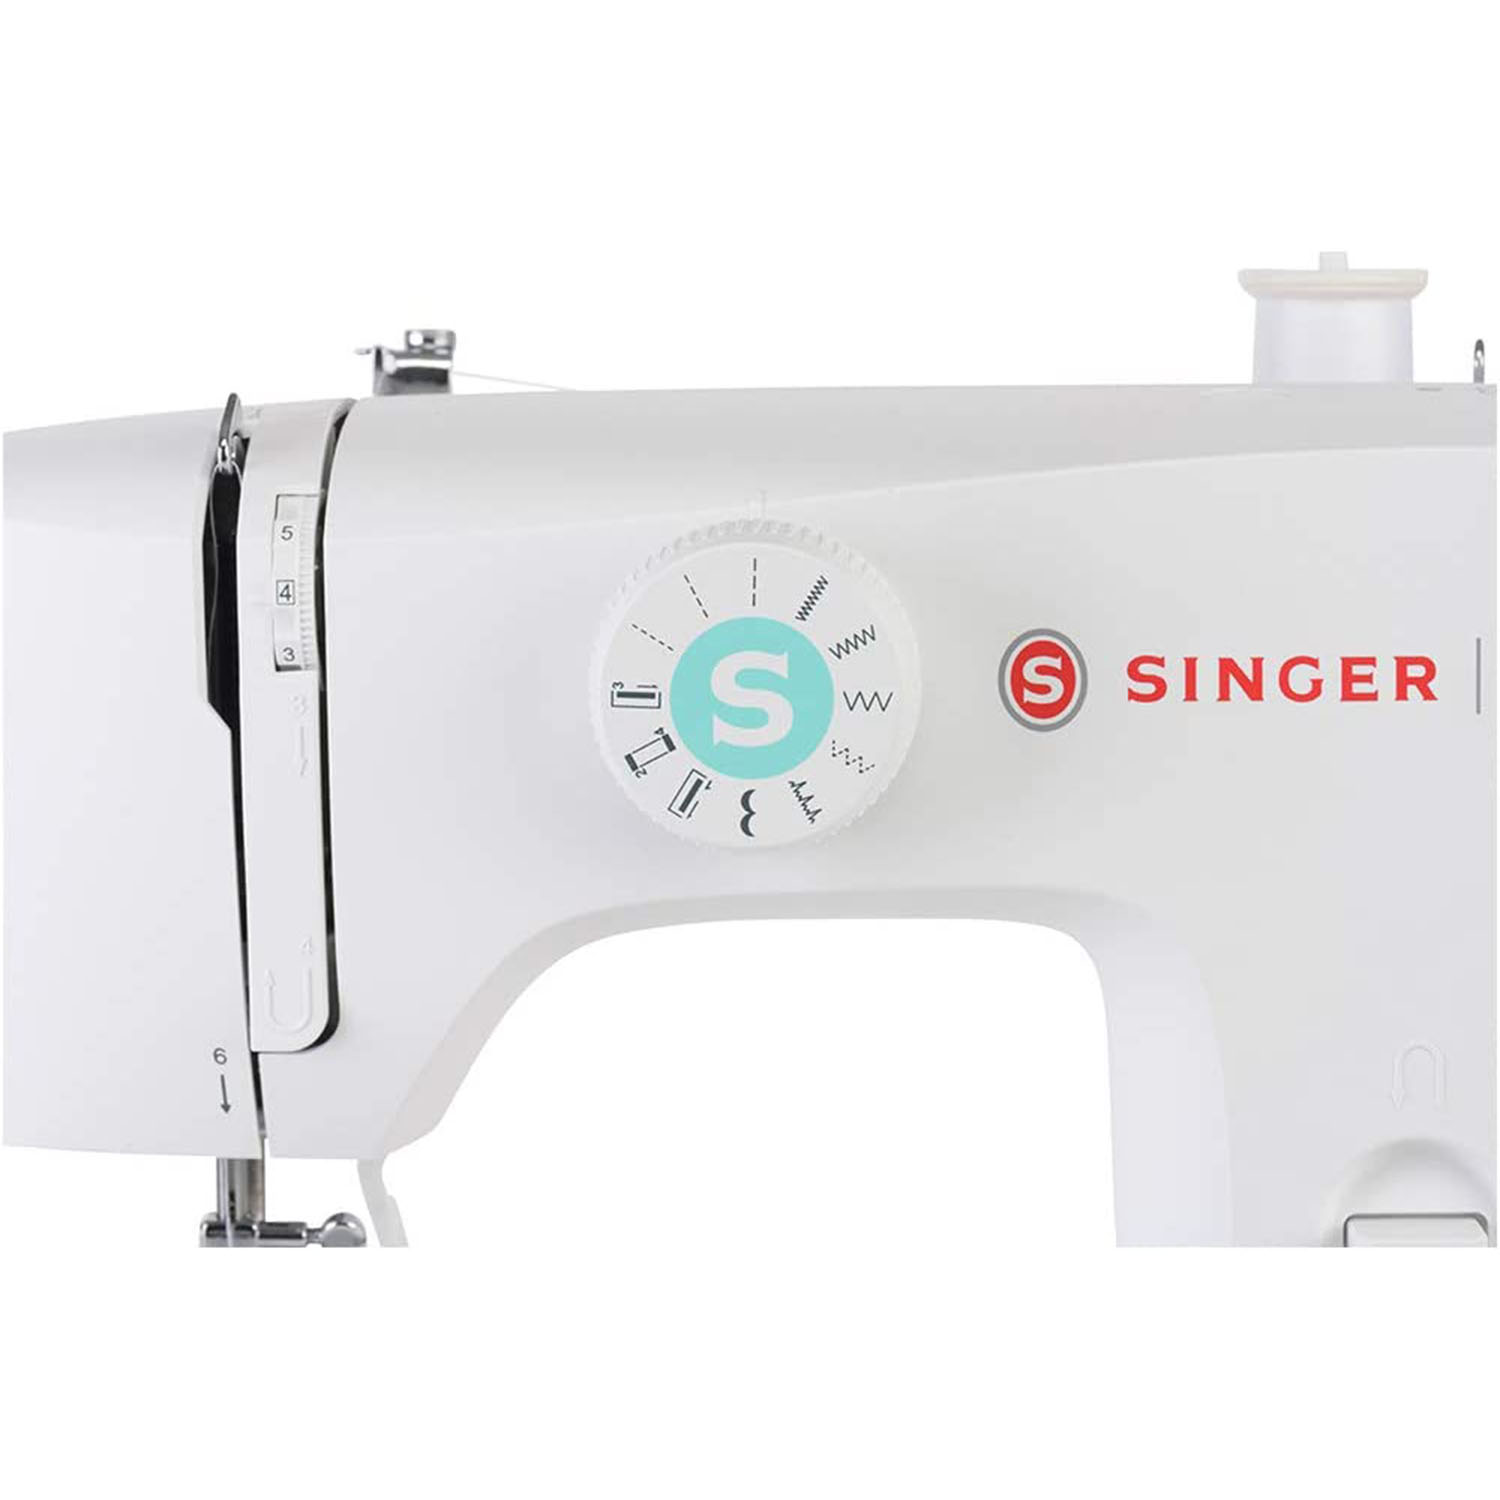 Singer M1500 Sewing Machine with 57 Stitch Applications and Accessories